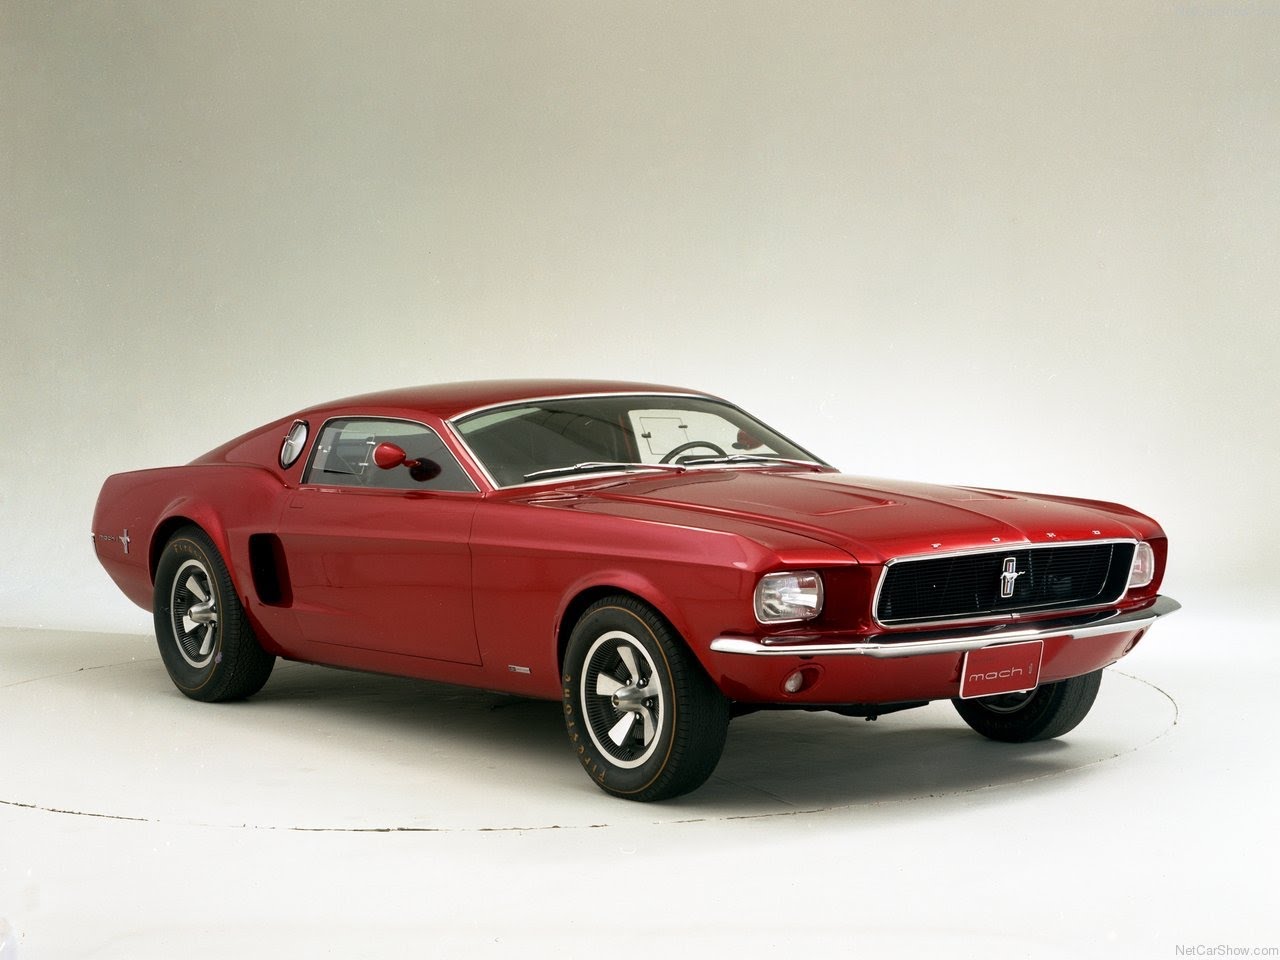 Amazing 1966 Ford Mustang Mach 1 Pictures & Backgrounds